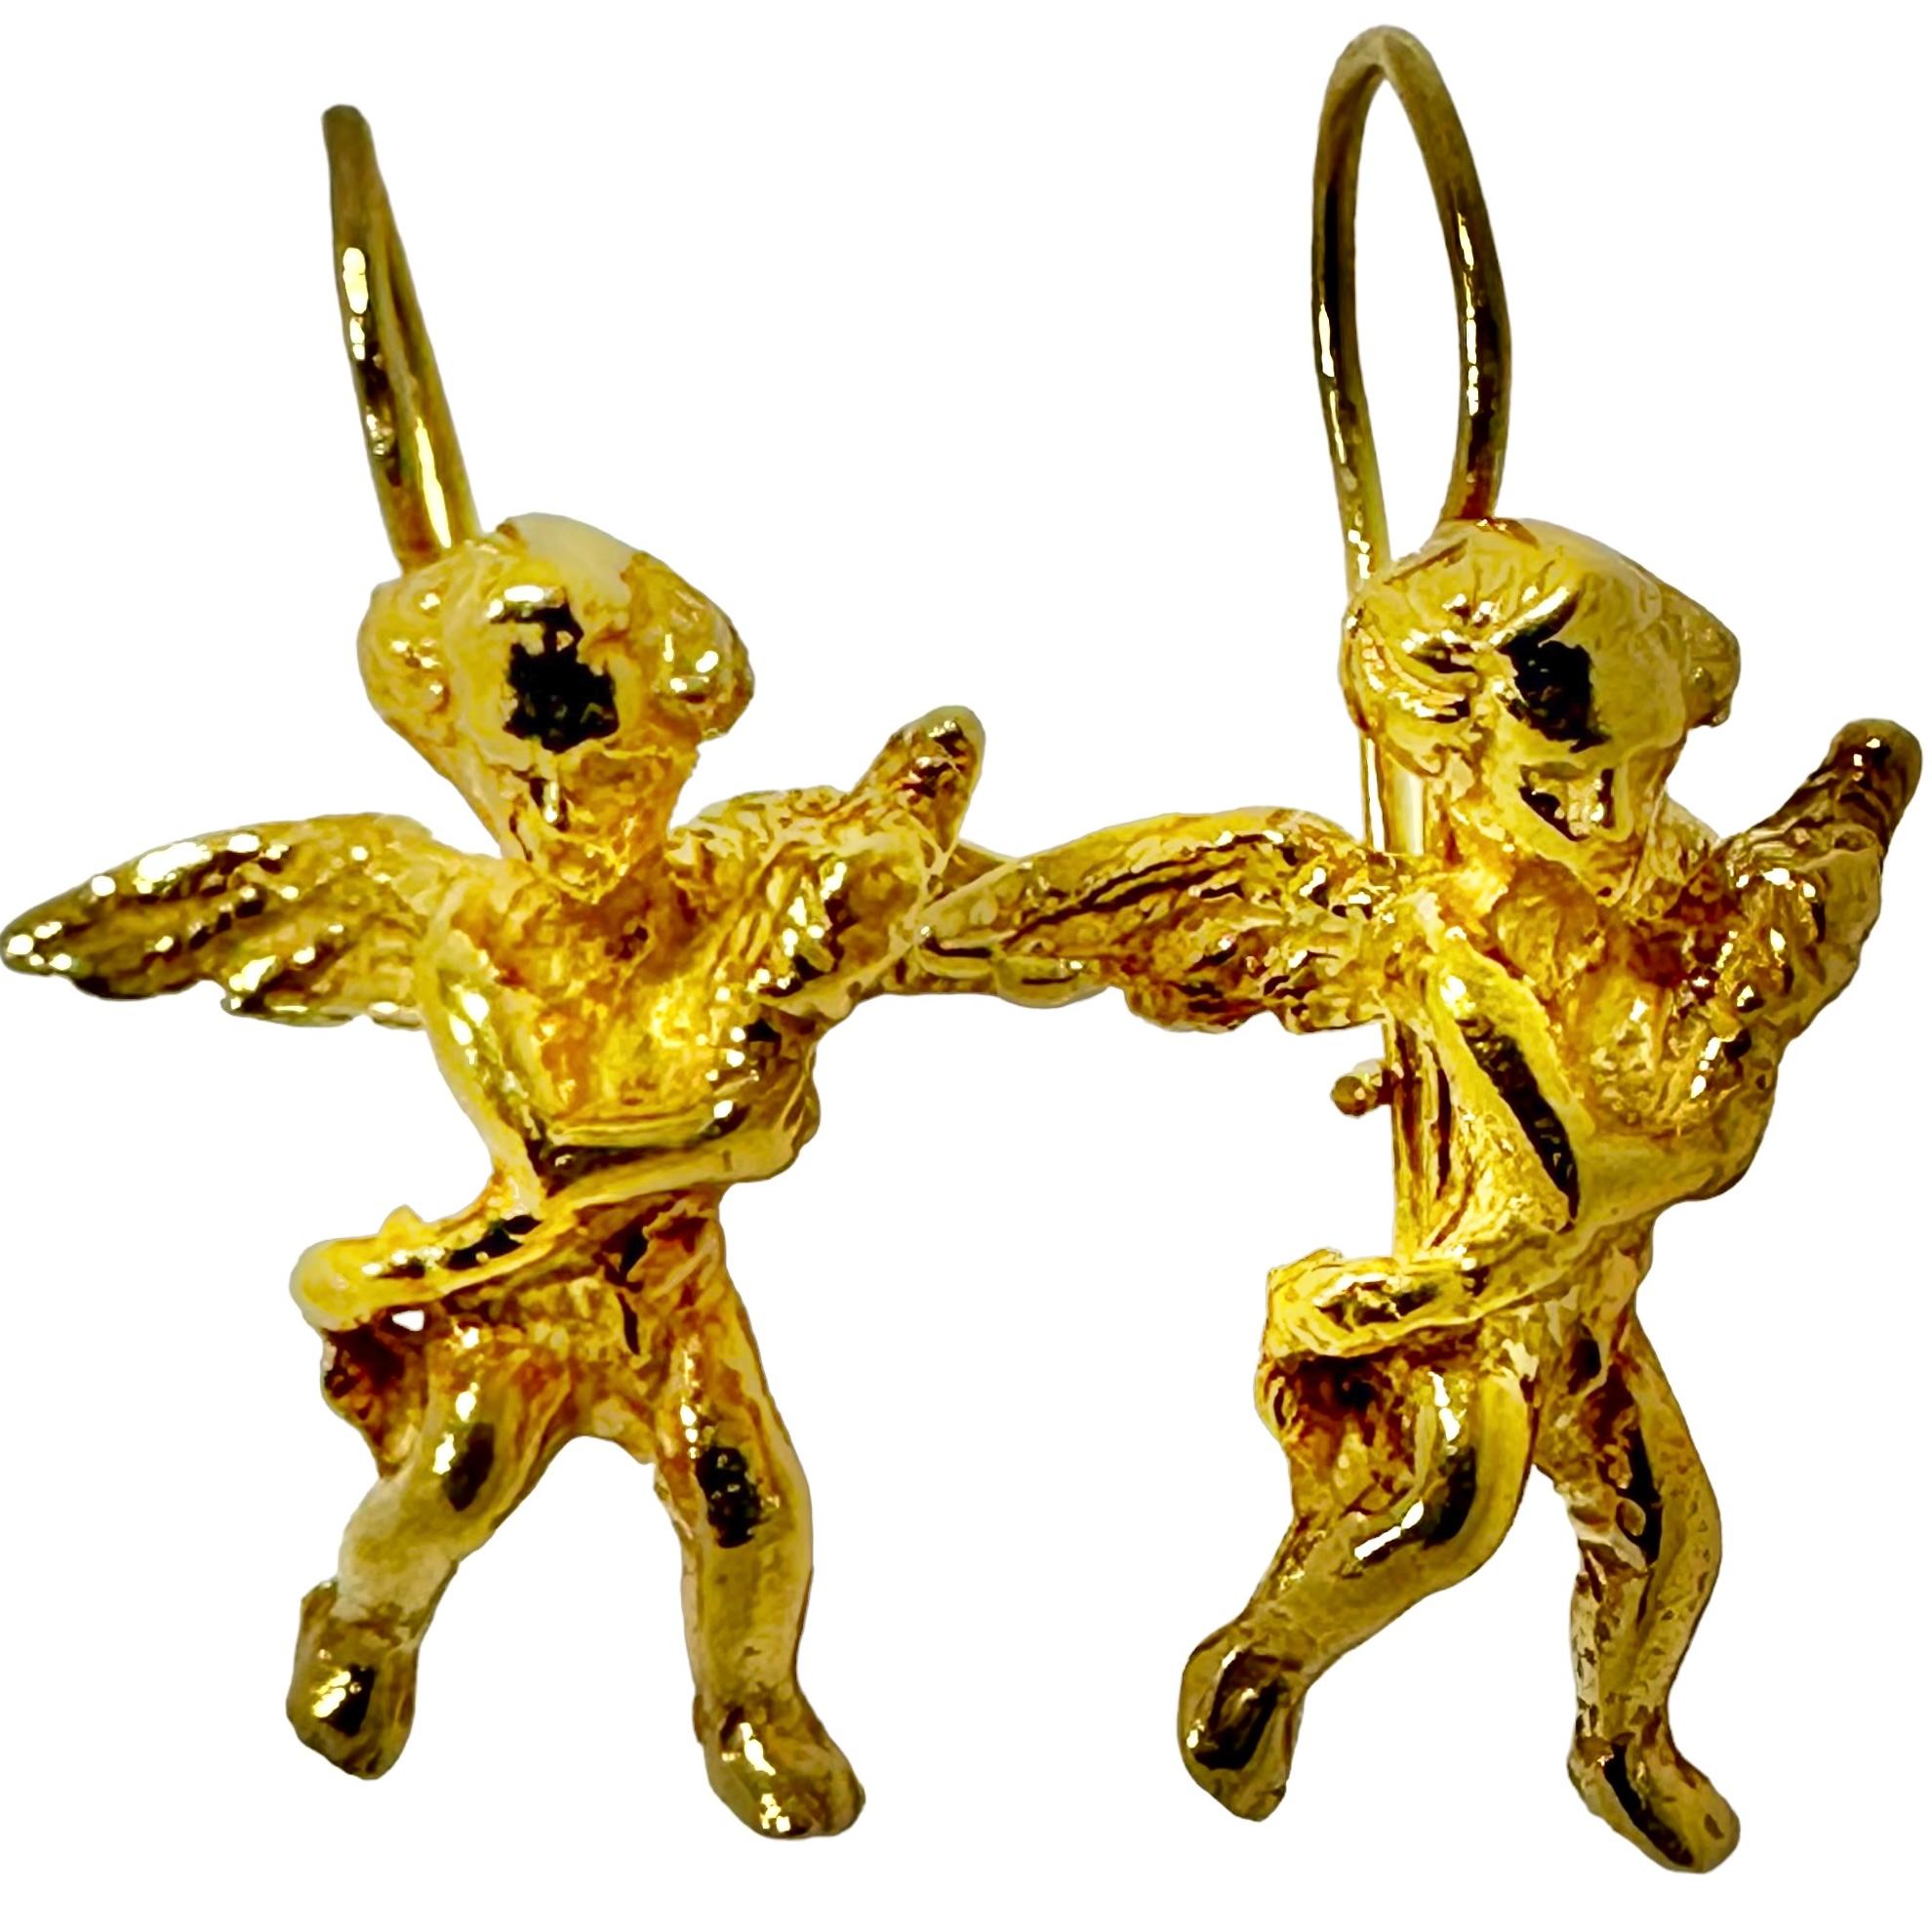 A pair of divine little cherubs. Created in 14K yellow gold, these mischievous little angels seem to be carrying an object in their arms. 
With a wingspan of 11/16 of an inch wide, and measuring 1 1/4 inches to the top of the ear wire, these cherubs